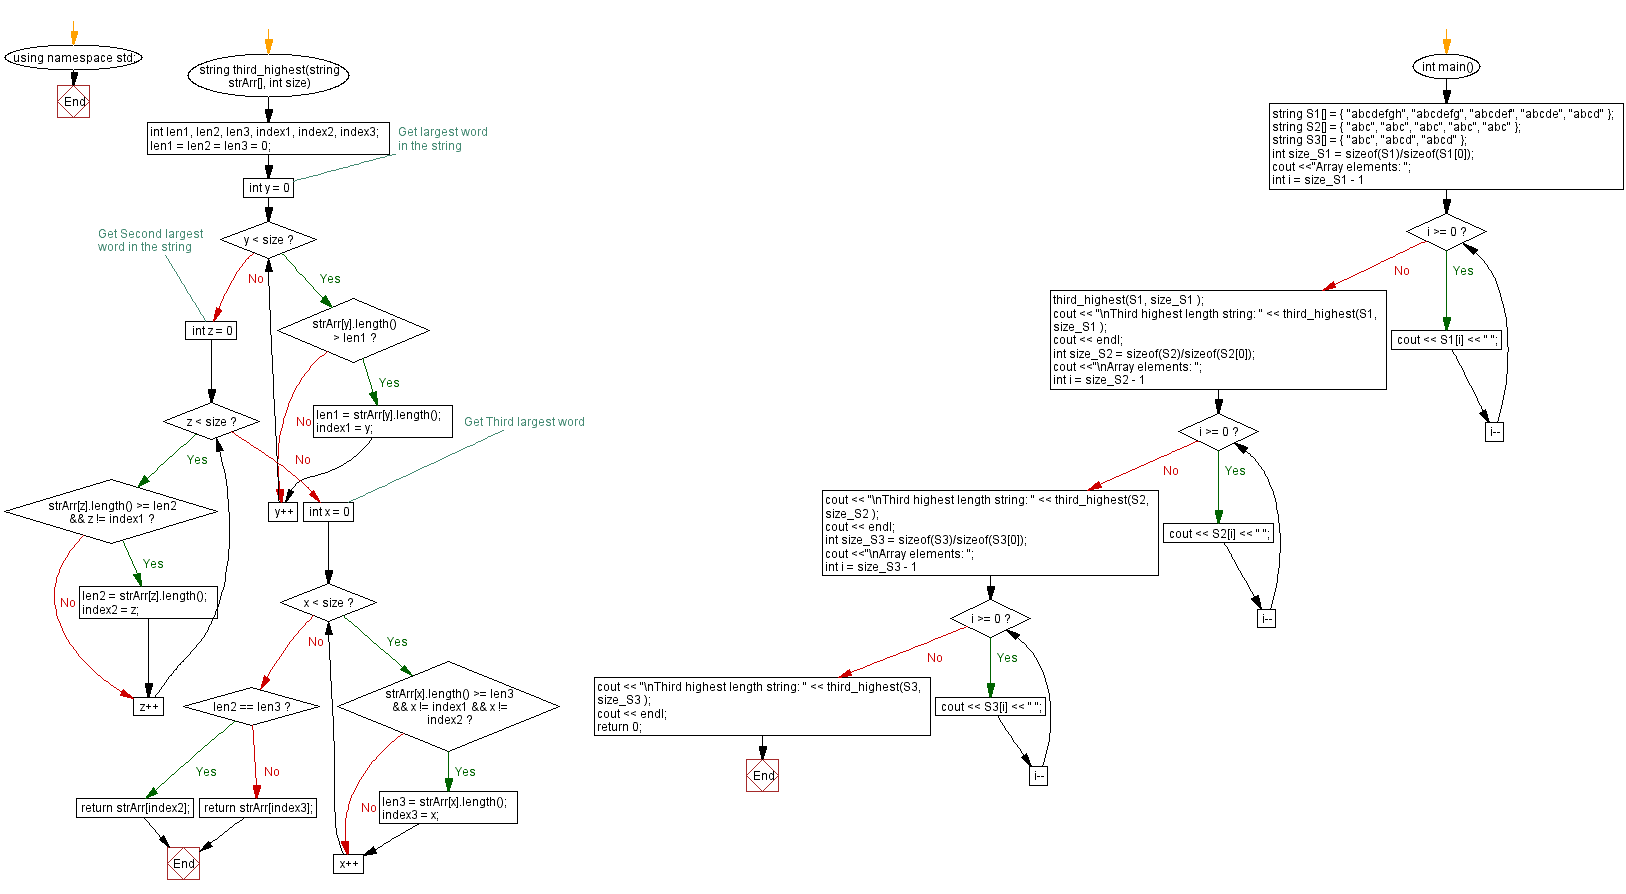 Flowchart: Third largest string within an array of strings.